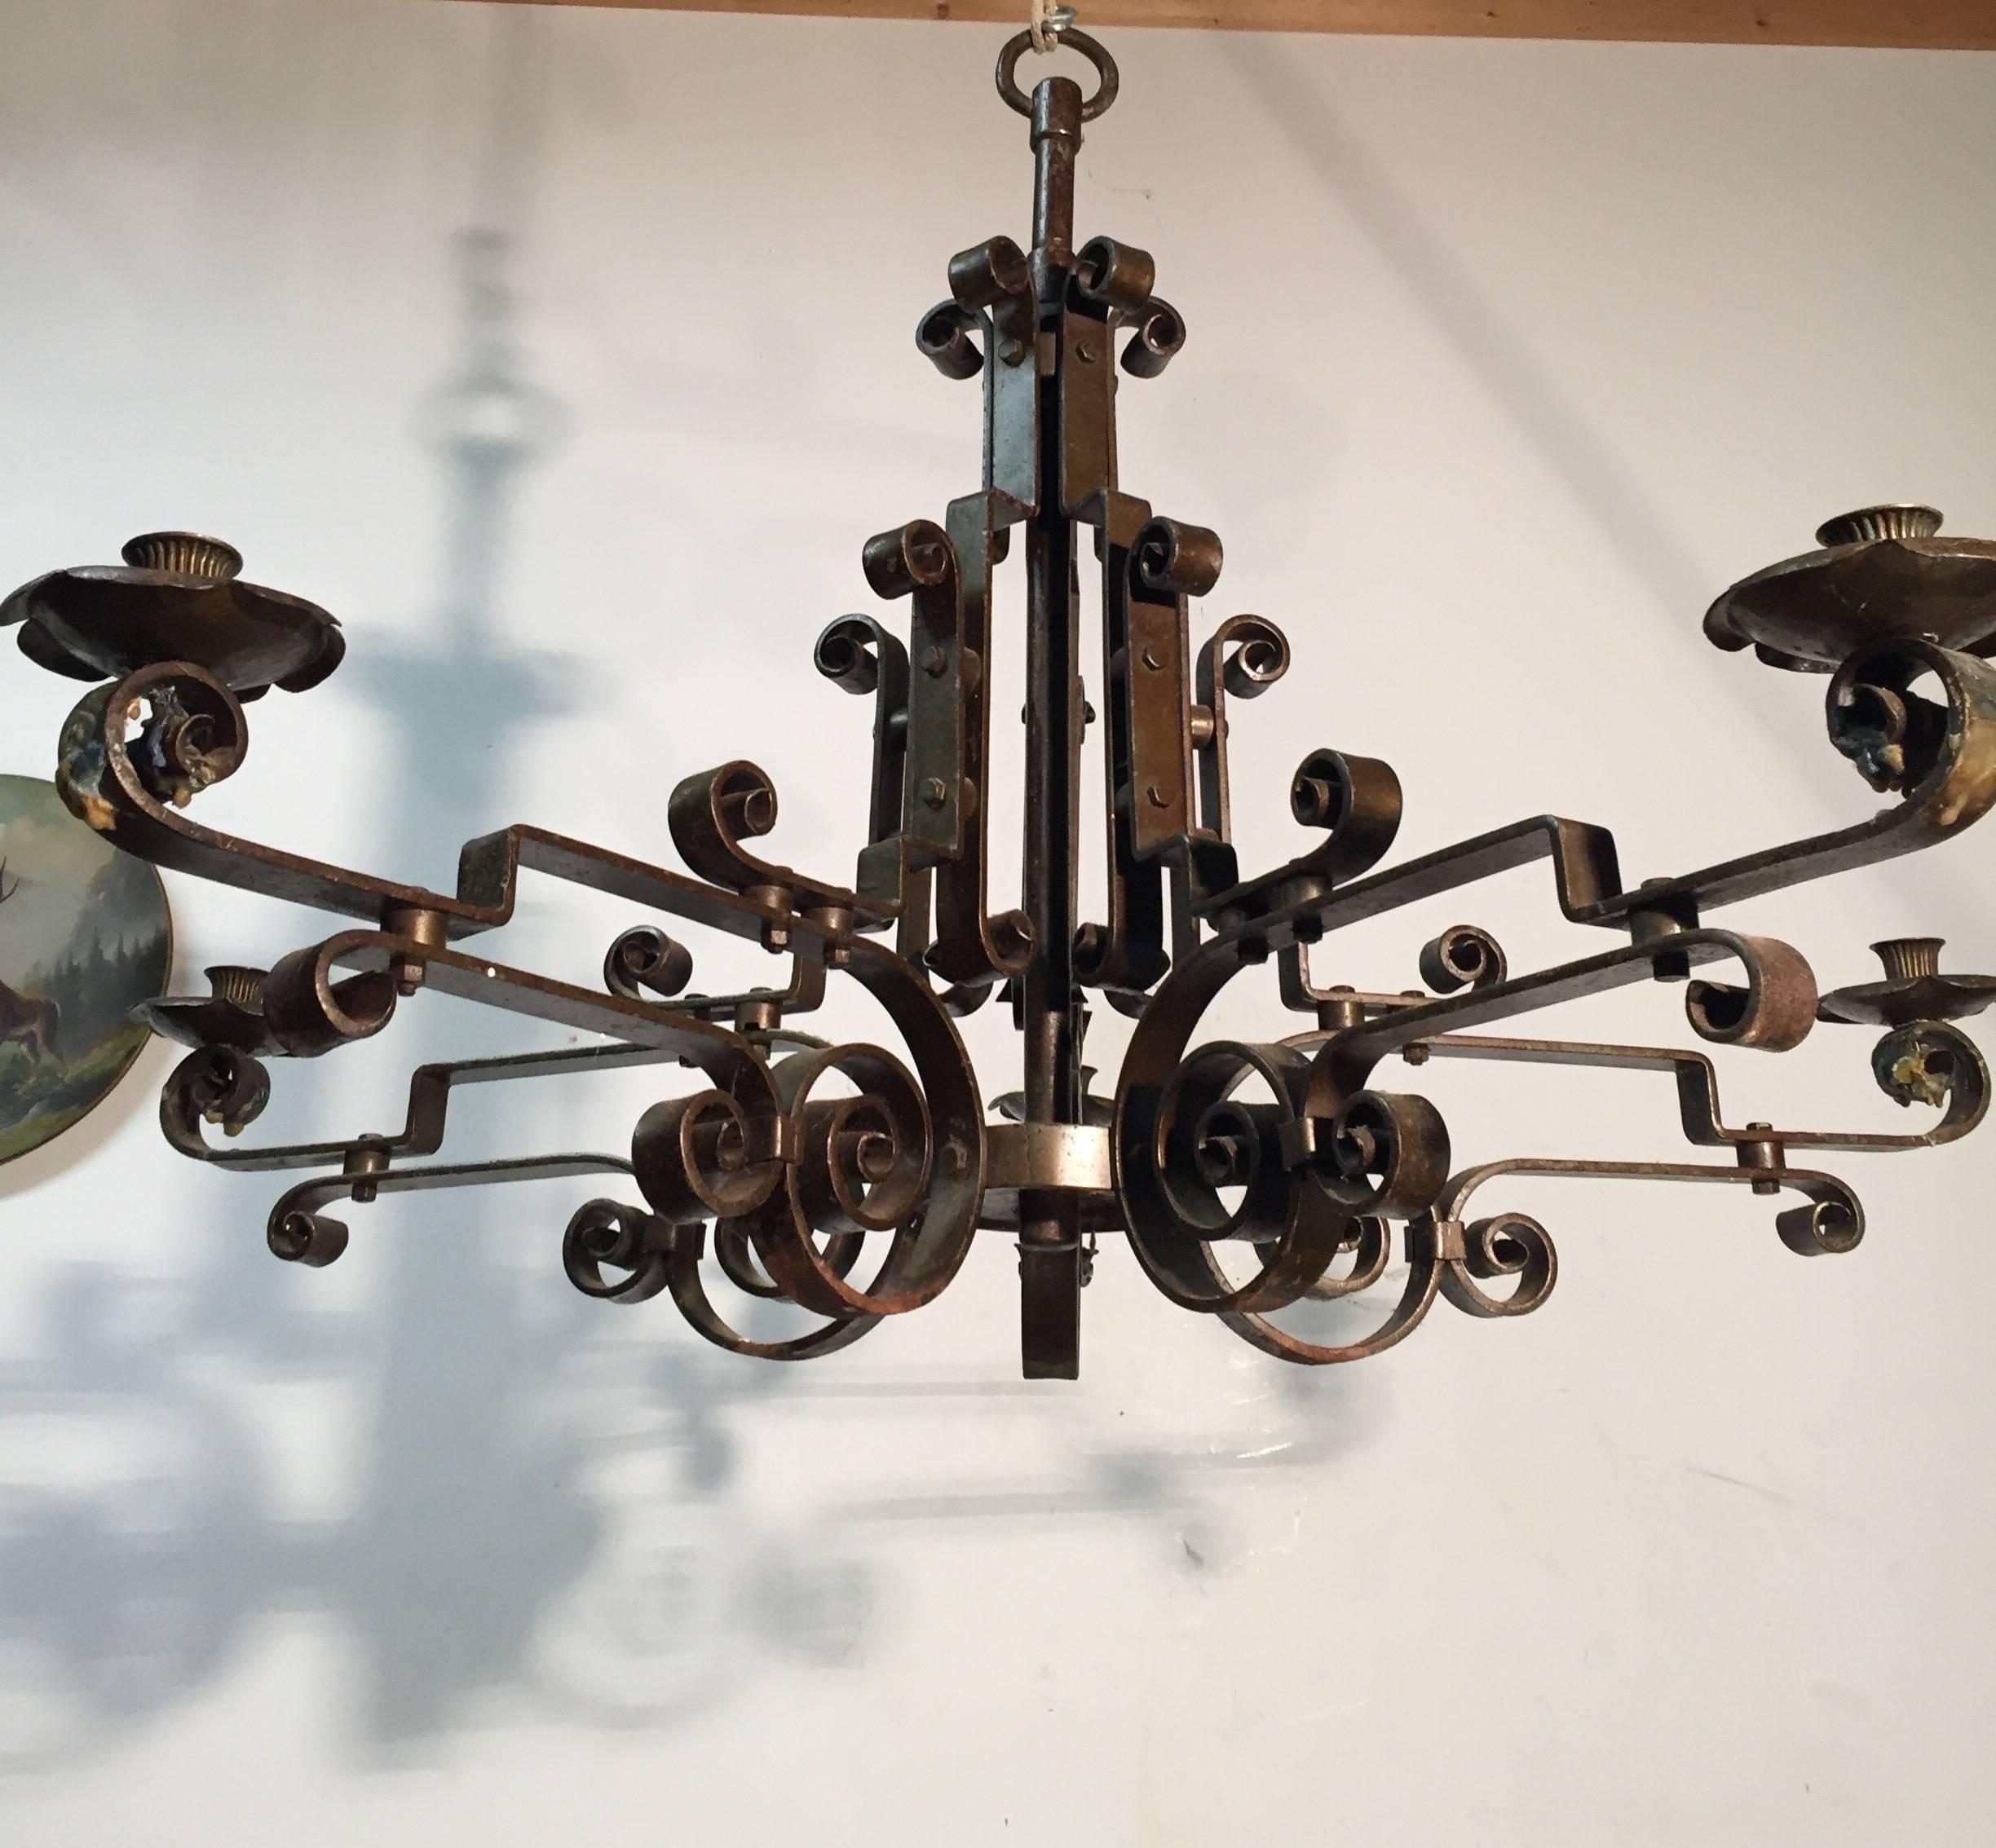 20th Century Mid-Century Symmetrical Wrought Iron 5 Arm Candles or Electrical Chandelier